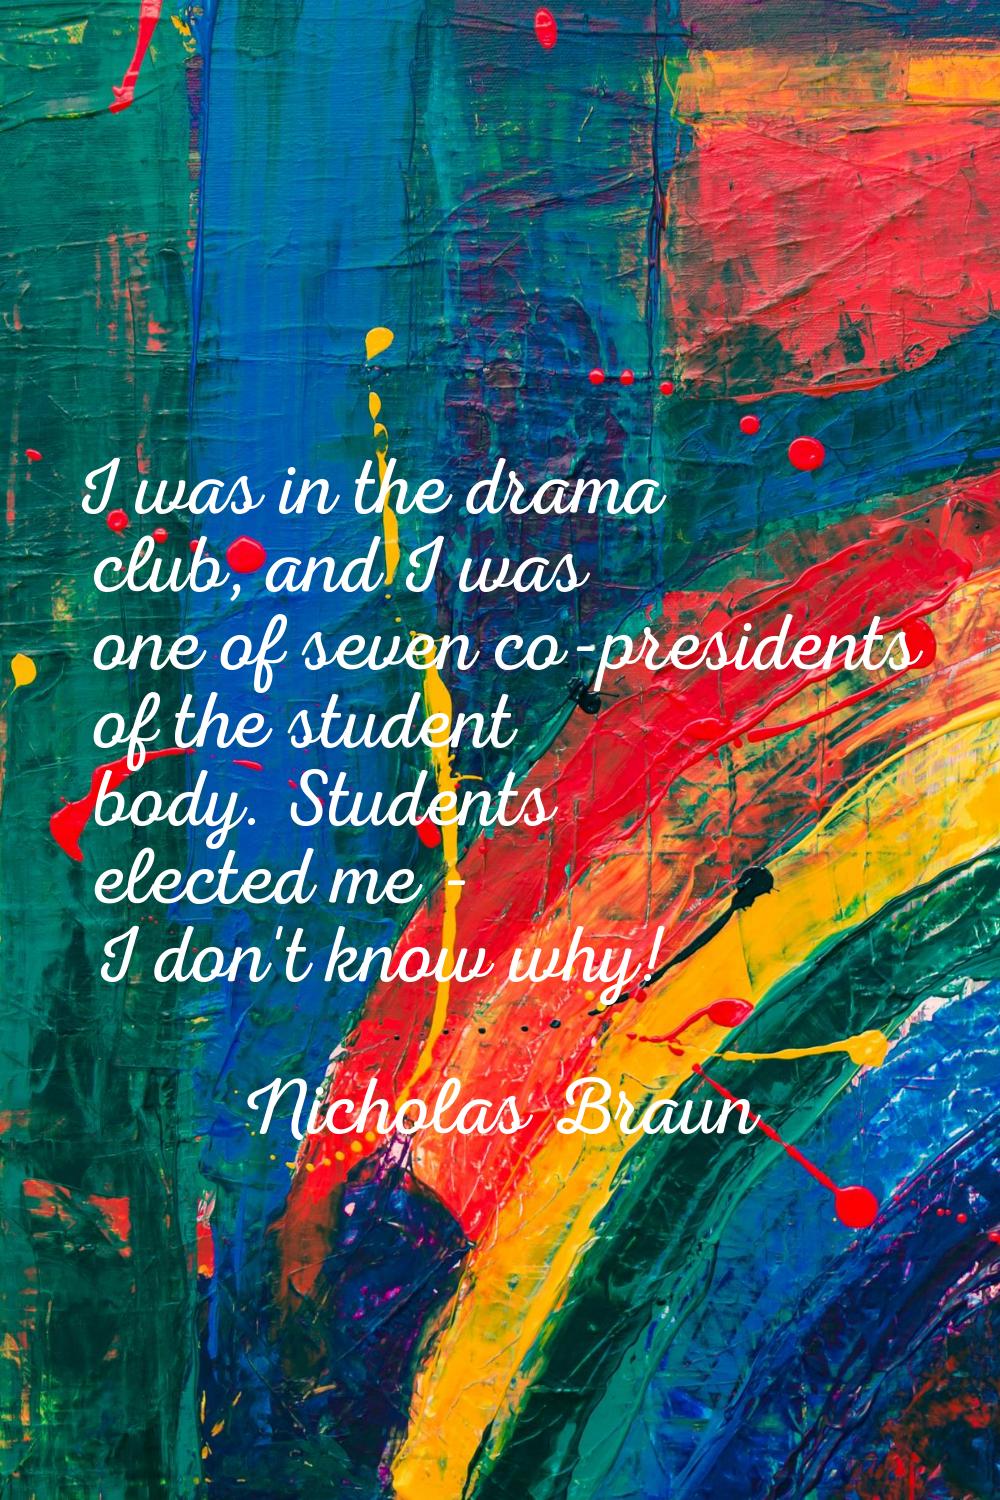 I was in the drama club, and I was one of seven co-presidents of the student body. Students elected